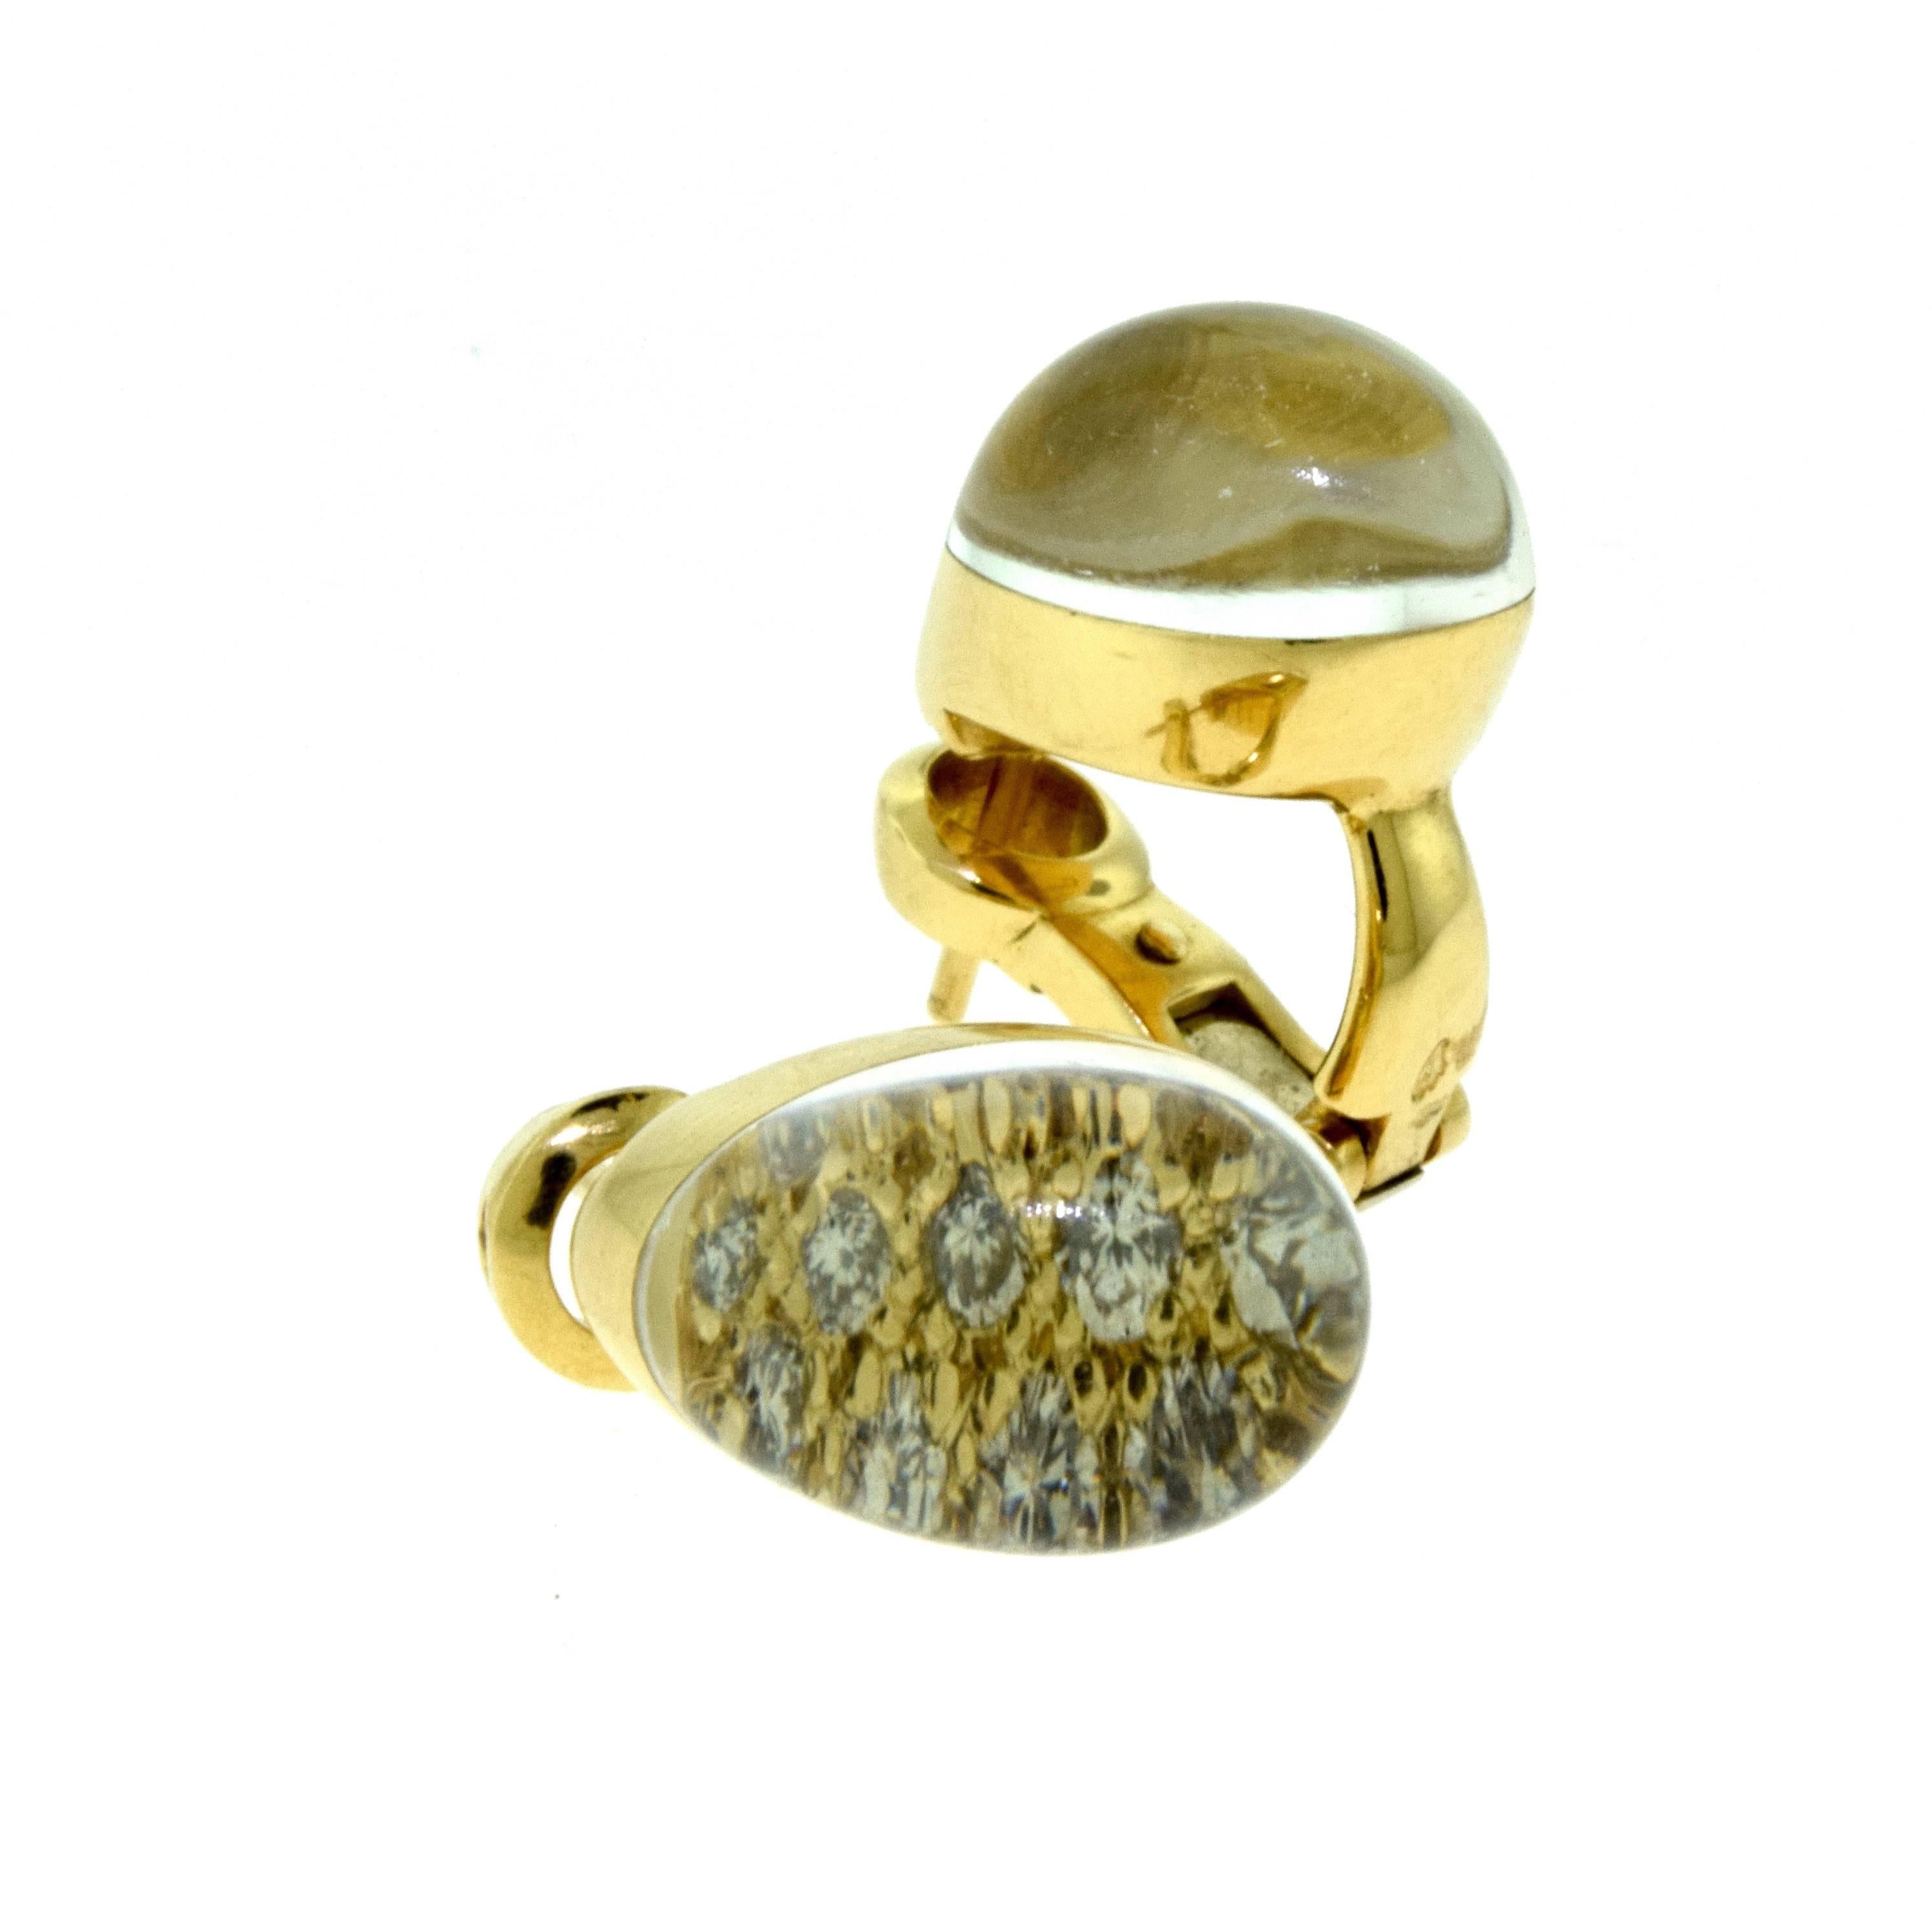 Designer: Cartier
Collection: Myst de Cartier
Metal: Yellow Gold
Metal Purity: 18k
Stones: Round Brilliant Cut Diamonds, Dome Shaped Rock Crystal
Total Item Weight (g): 10.8
Dimensions: 9.29 x 13.51 mm
Hallmark: Cartier 750 Serial No. 
Type: